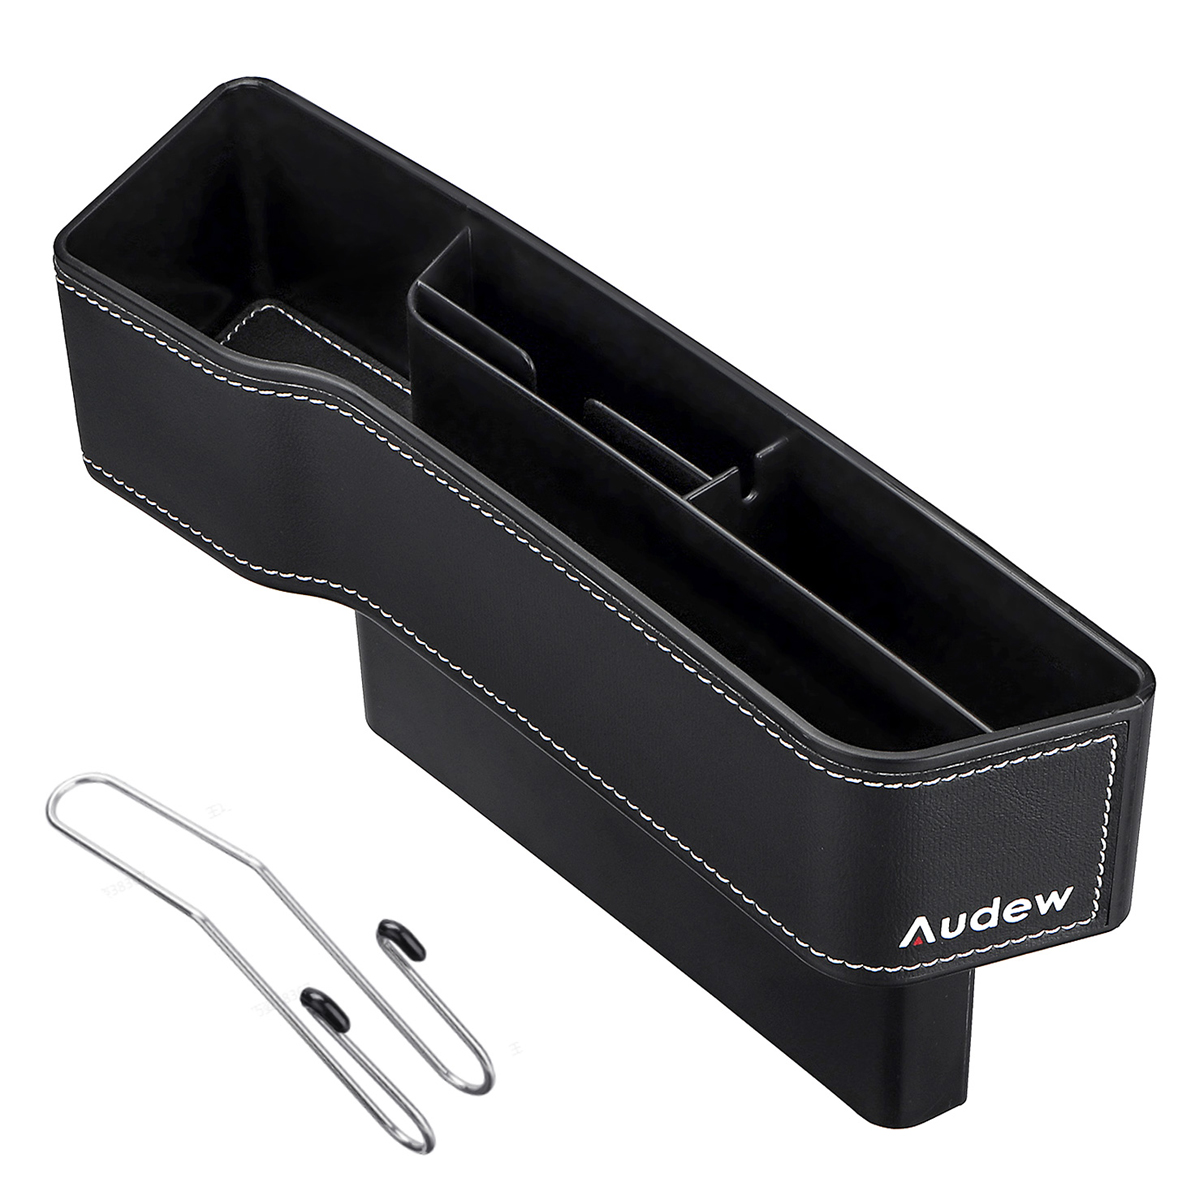 AUDEW Car Organizer Auto Seat Crevice Gaps Storage Box Cup Mobile Phone Holder for Pockets Stowing Tidying Organizer Car Accessories - Auto GoShop